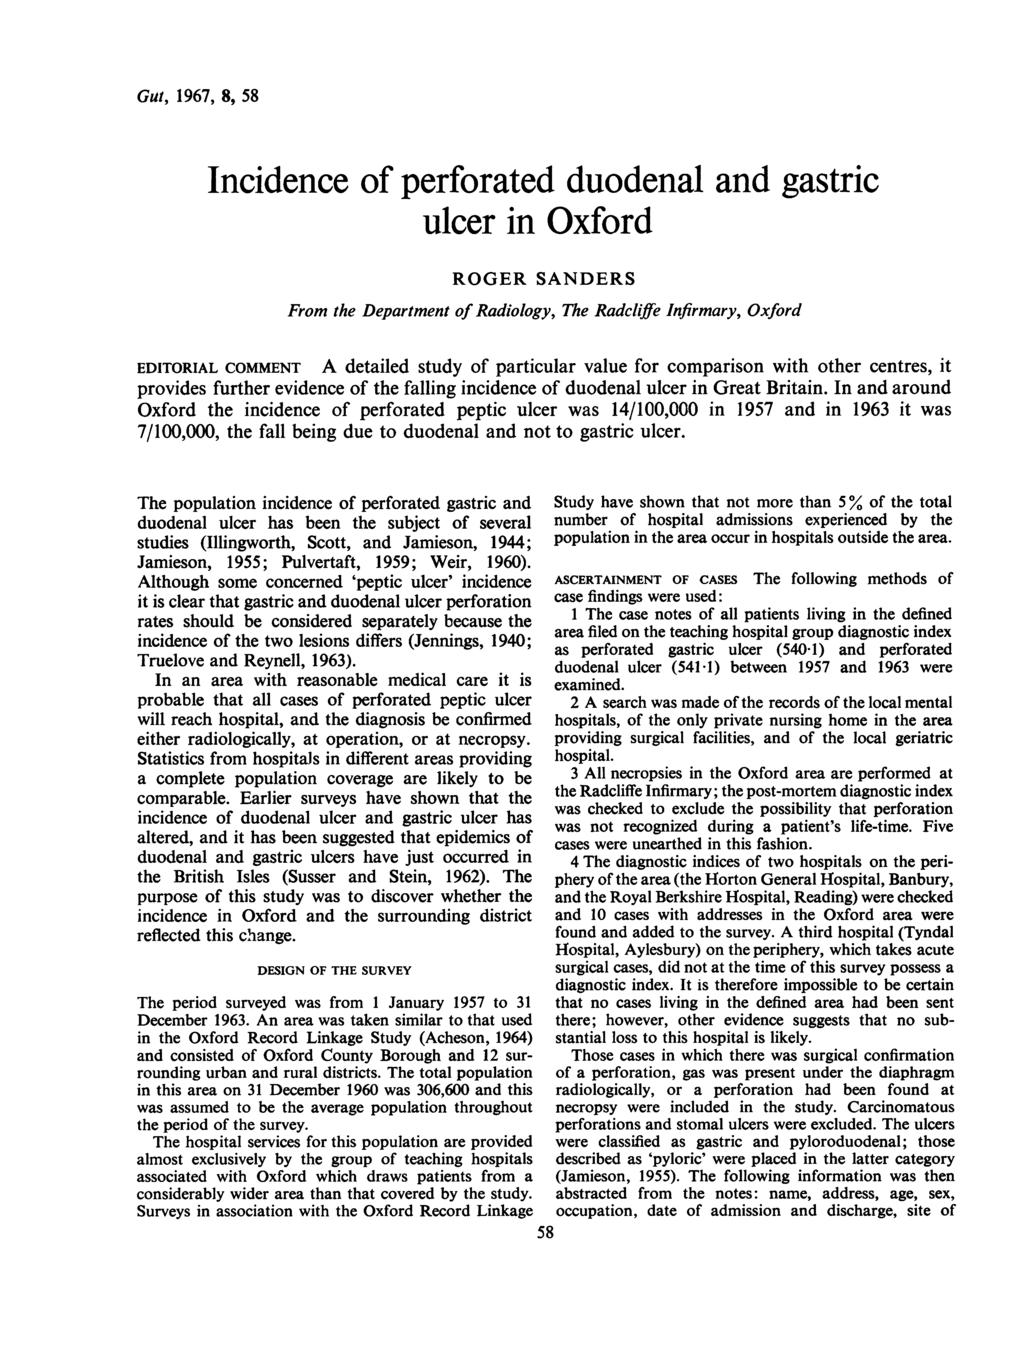 GuC, 1967, 8, 58 Incidence of perforated duodenal and gastric ulcer in Oxford ROGER SANDERS From the Department of Radiology, The Radcliffe Infirmary, Oxford EDITORIAL COMMENT A detailed study of